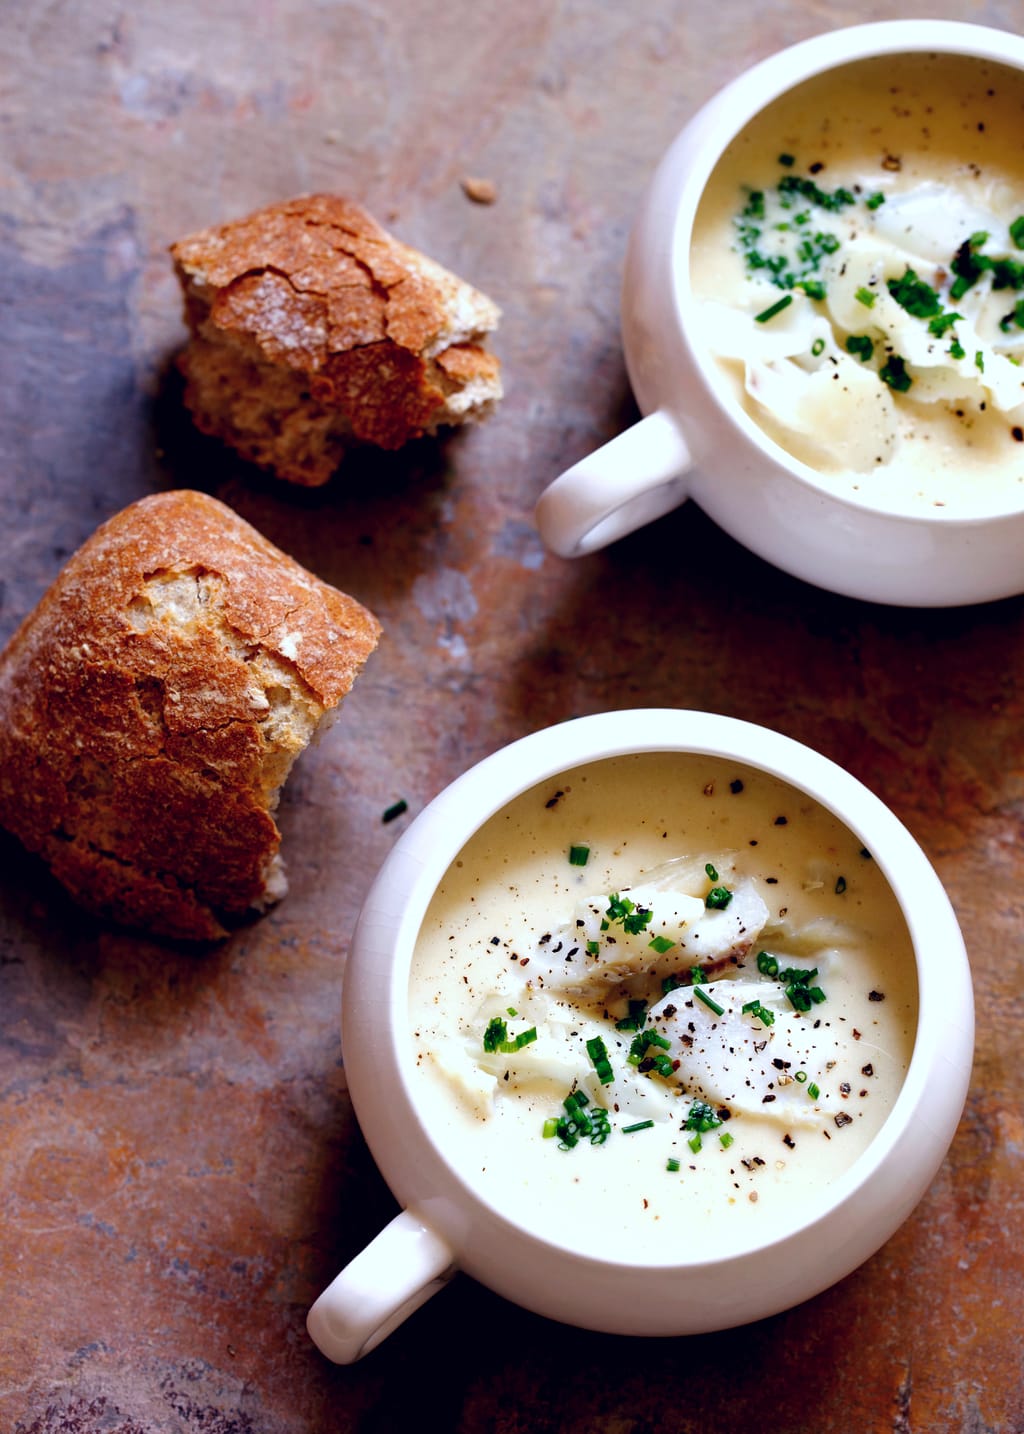 Cullen skink, a creamy Scottish soup with smoked haddock